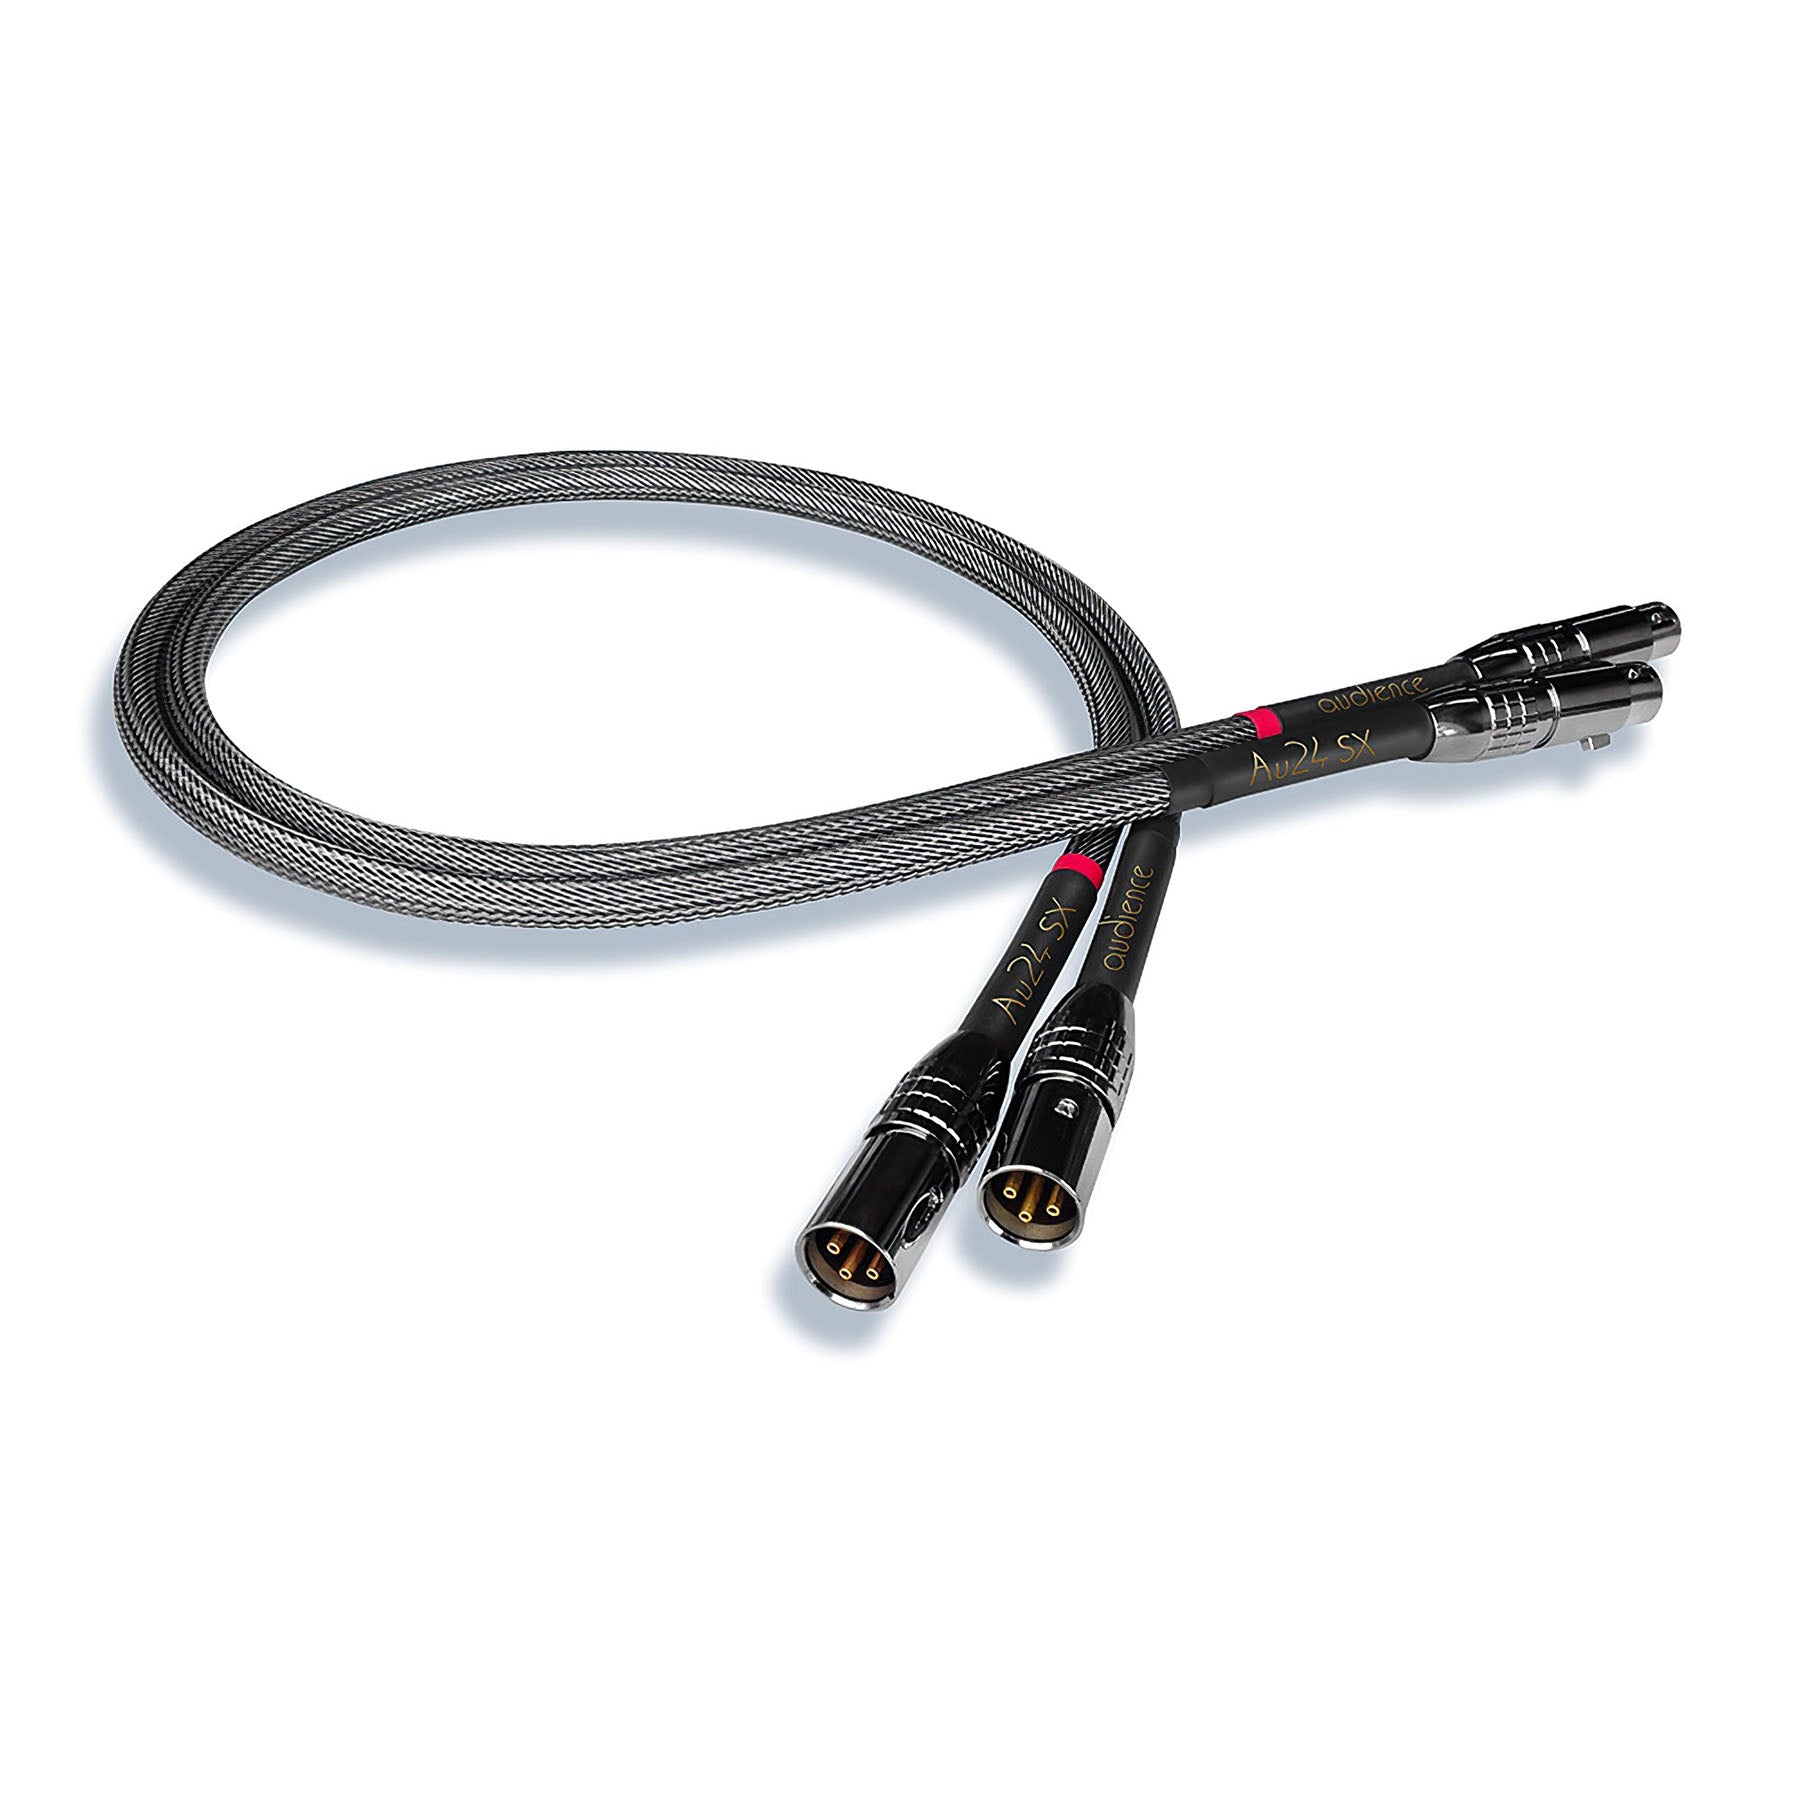 Audience Au24 SX Reference XLR Interconnect Cables (pair)